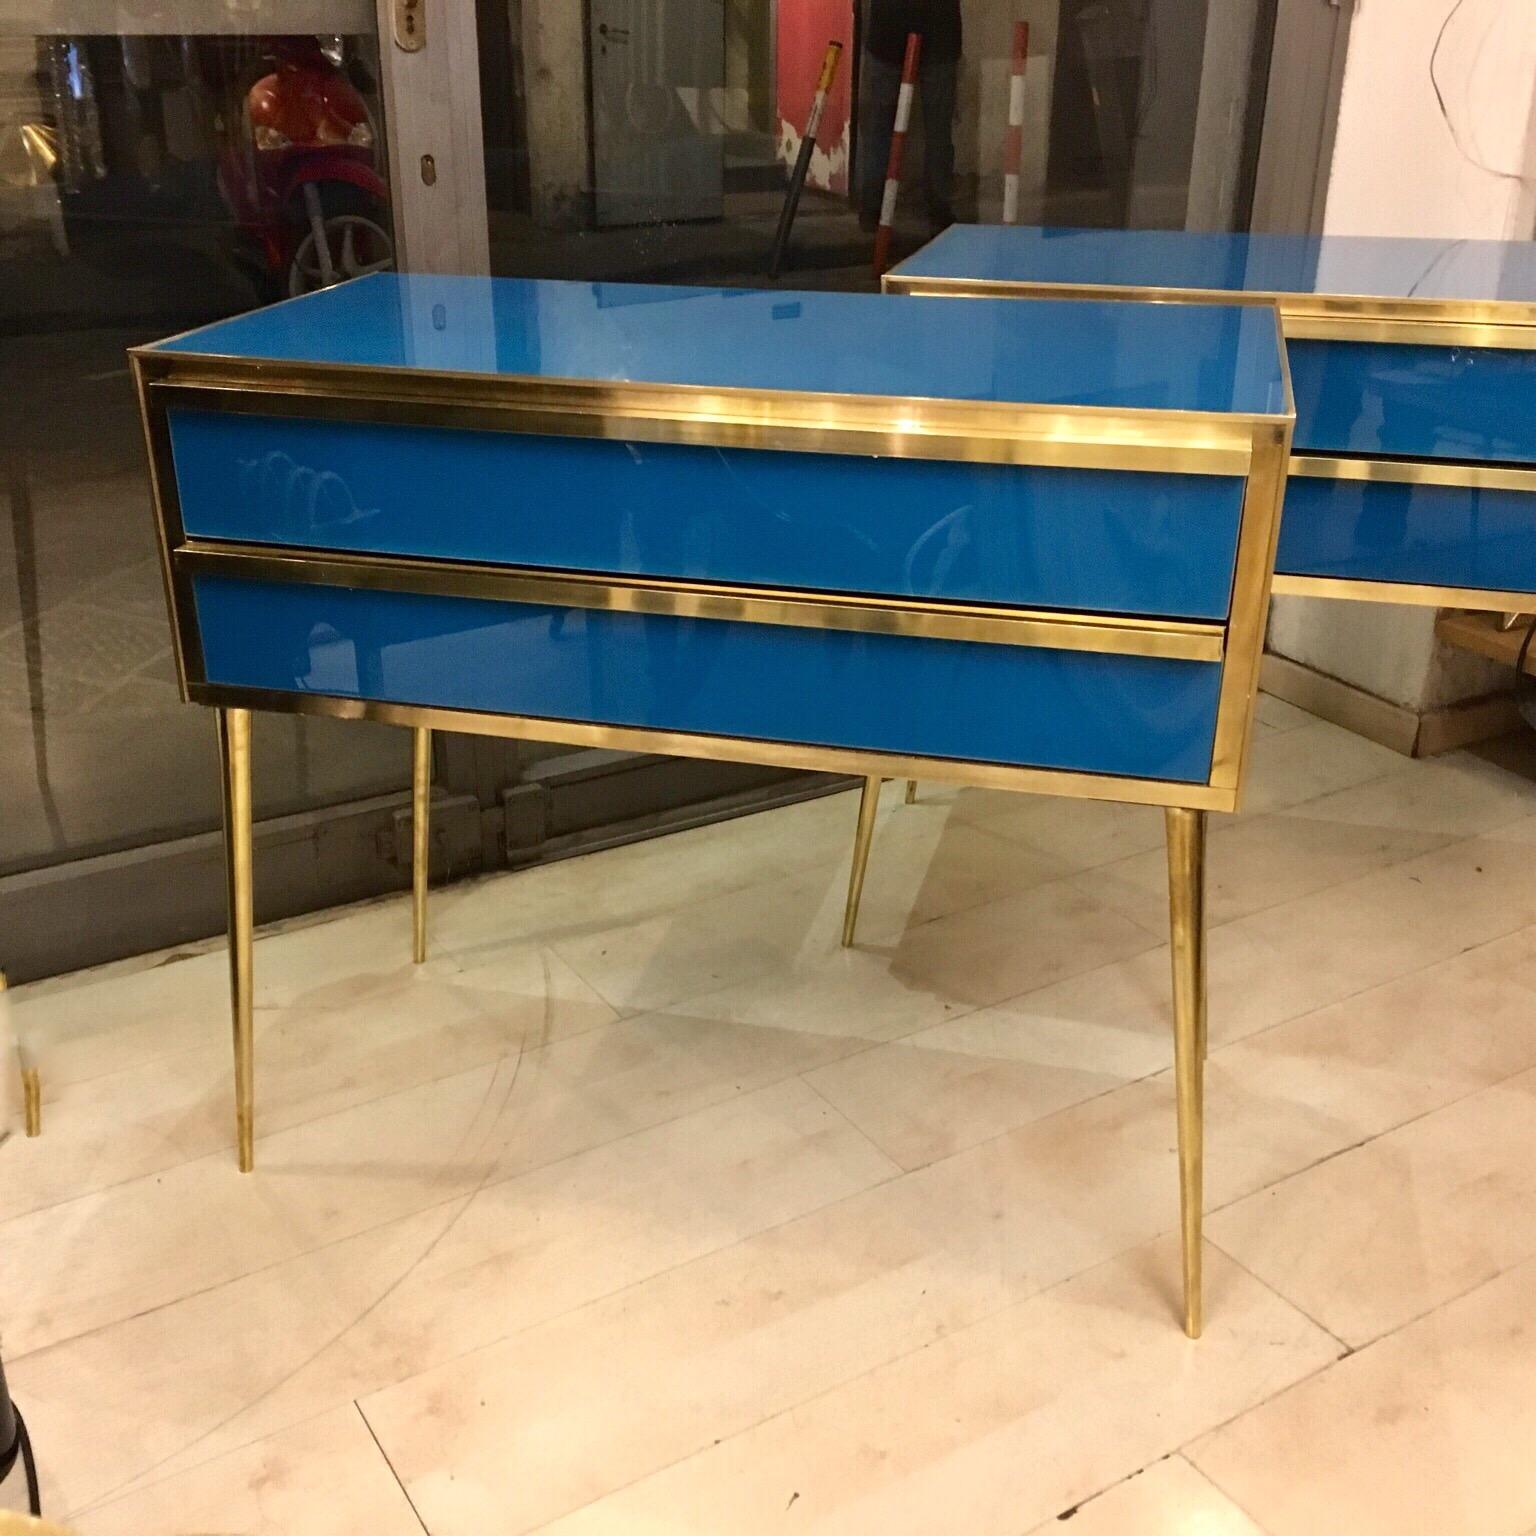 Peacock blue opaline glass chest of drawers, two drawers, brass legs and fittings. Available the pair, they can be used as nightstands.
 